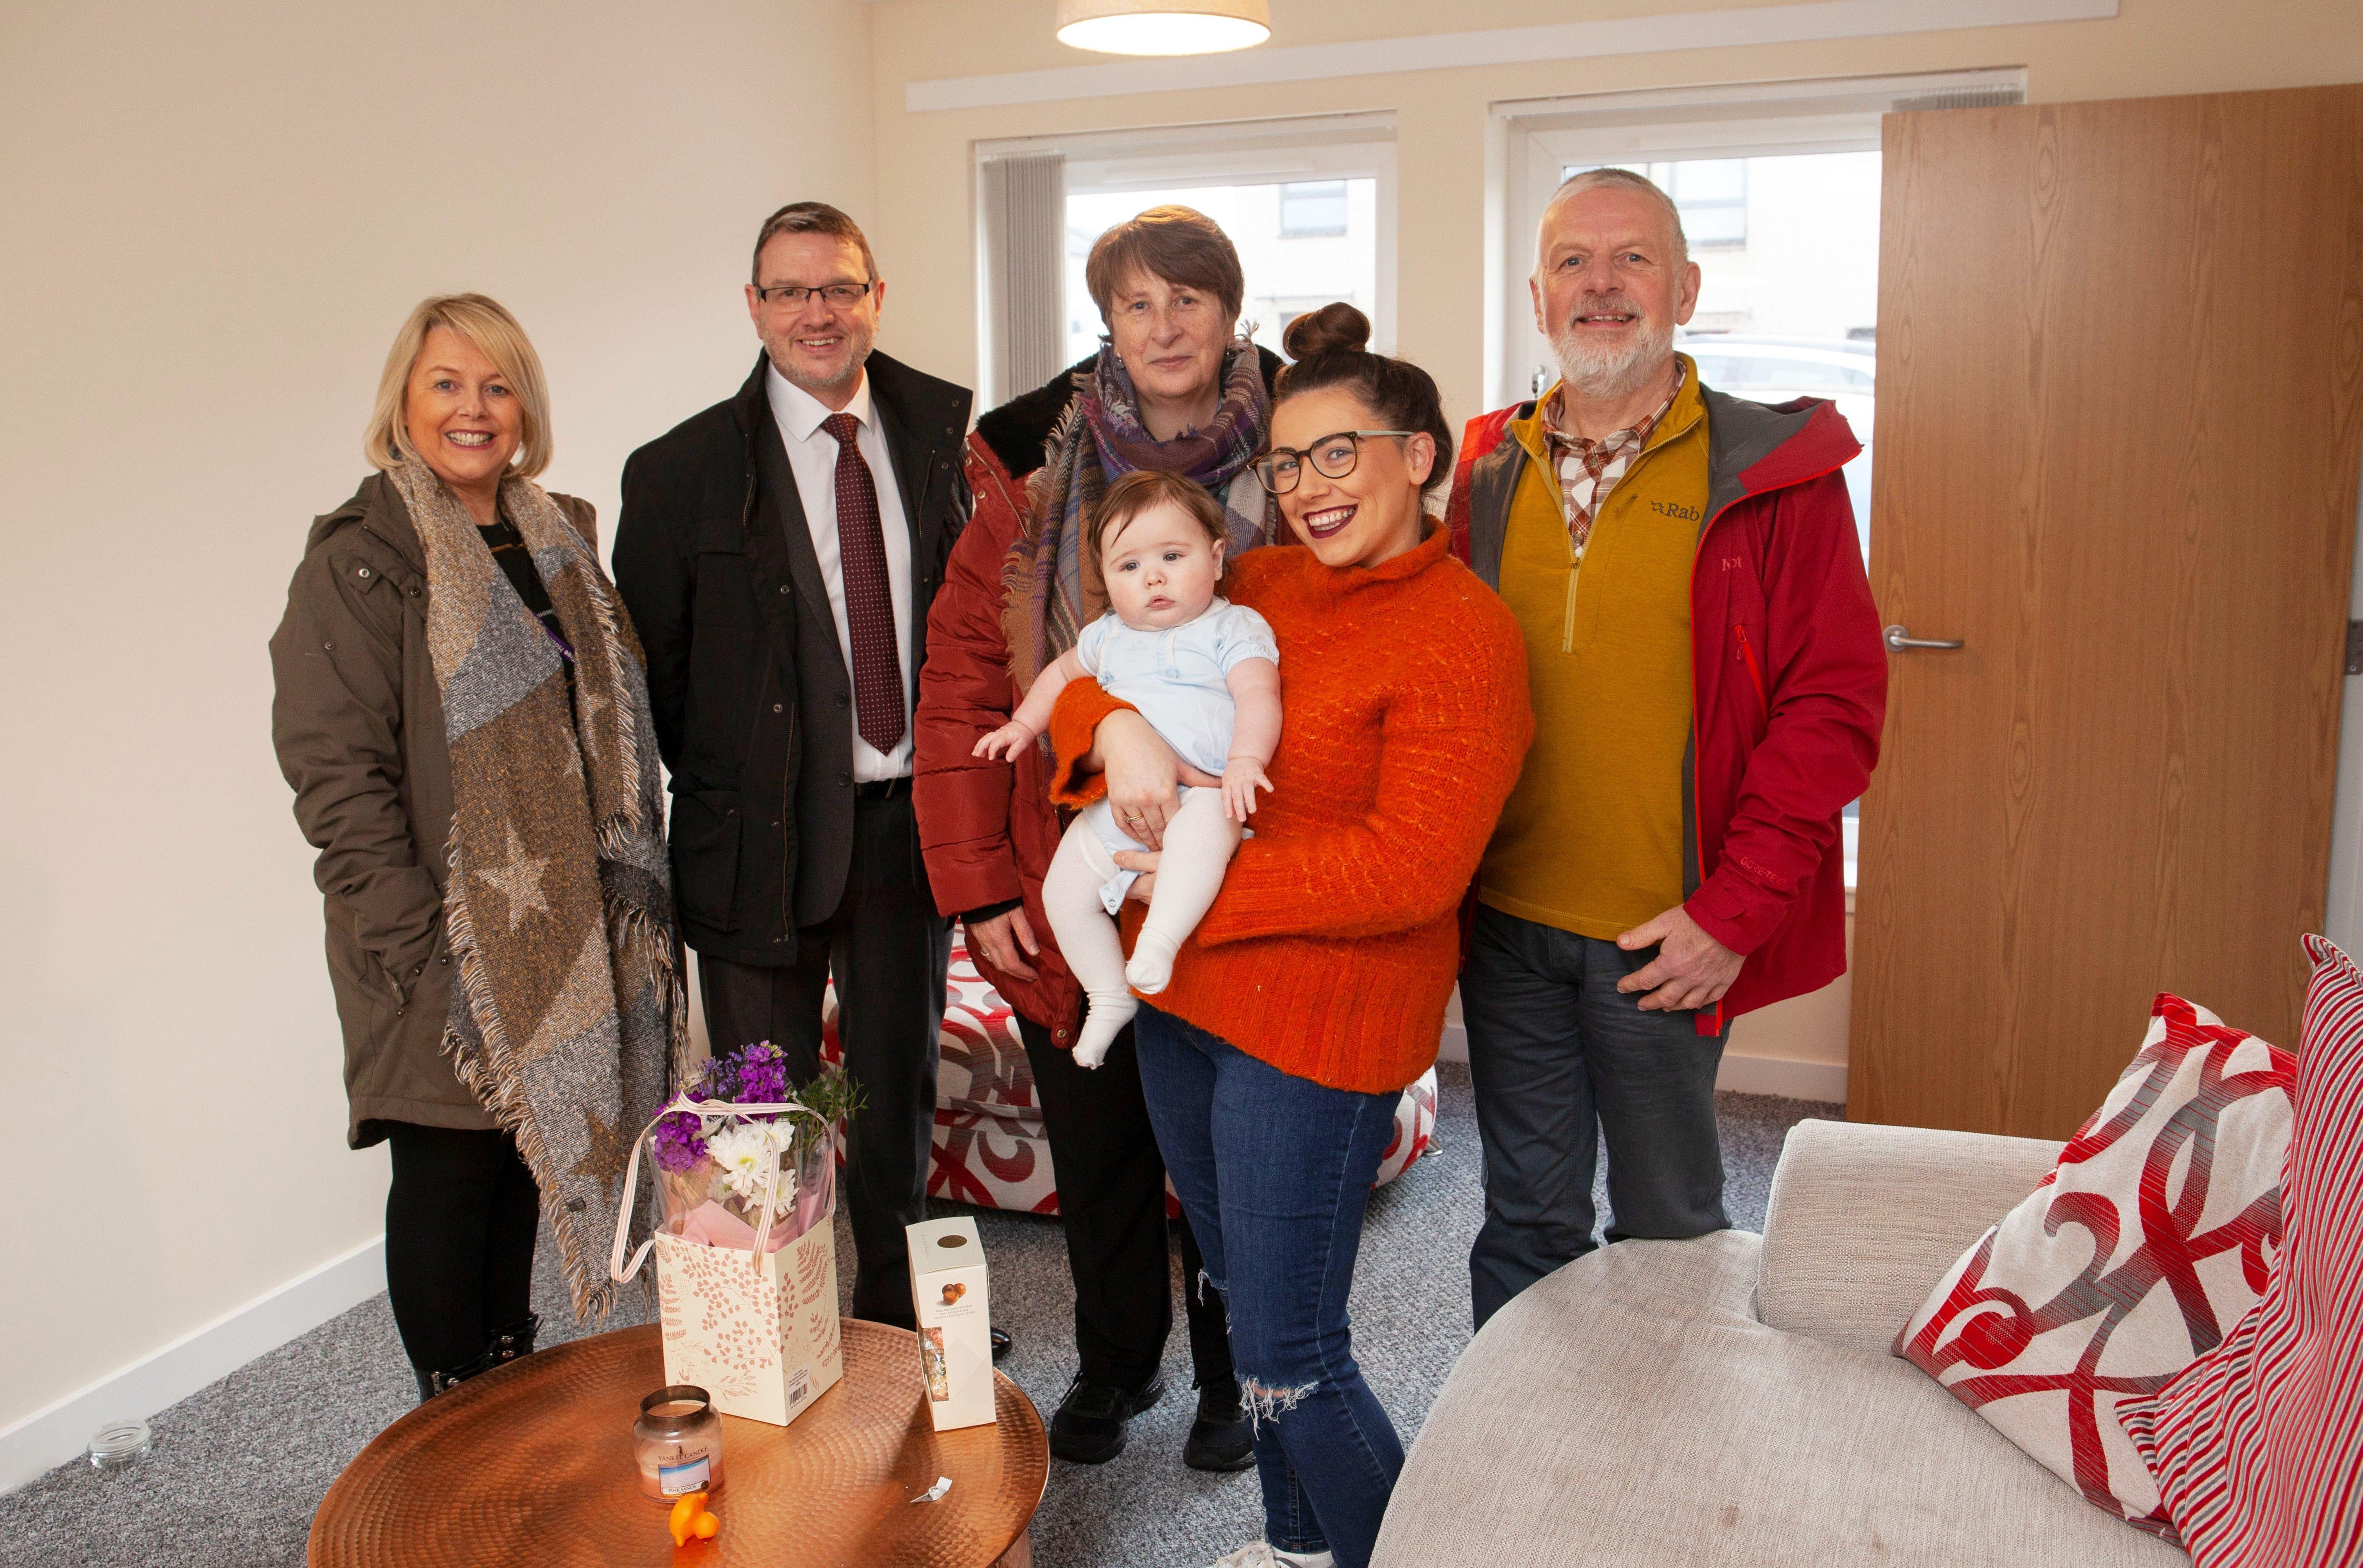 New tenants Sarah O’Donnell and baby Darragh in their new home with the Oak Tree team (from left), Julie McEwan, Senior Housing Officer; Hazel Aitken, Housing Manager (red jacket); Brian Praties, Development/Technical Services Manager; and Chairperson, Colin Campbell.